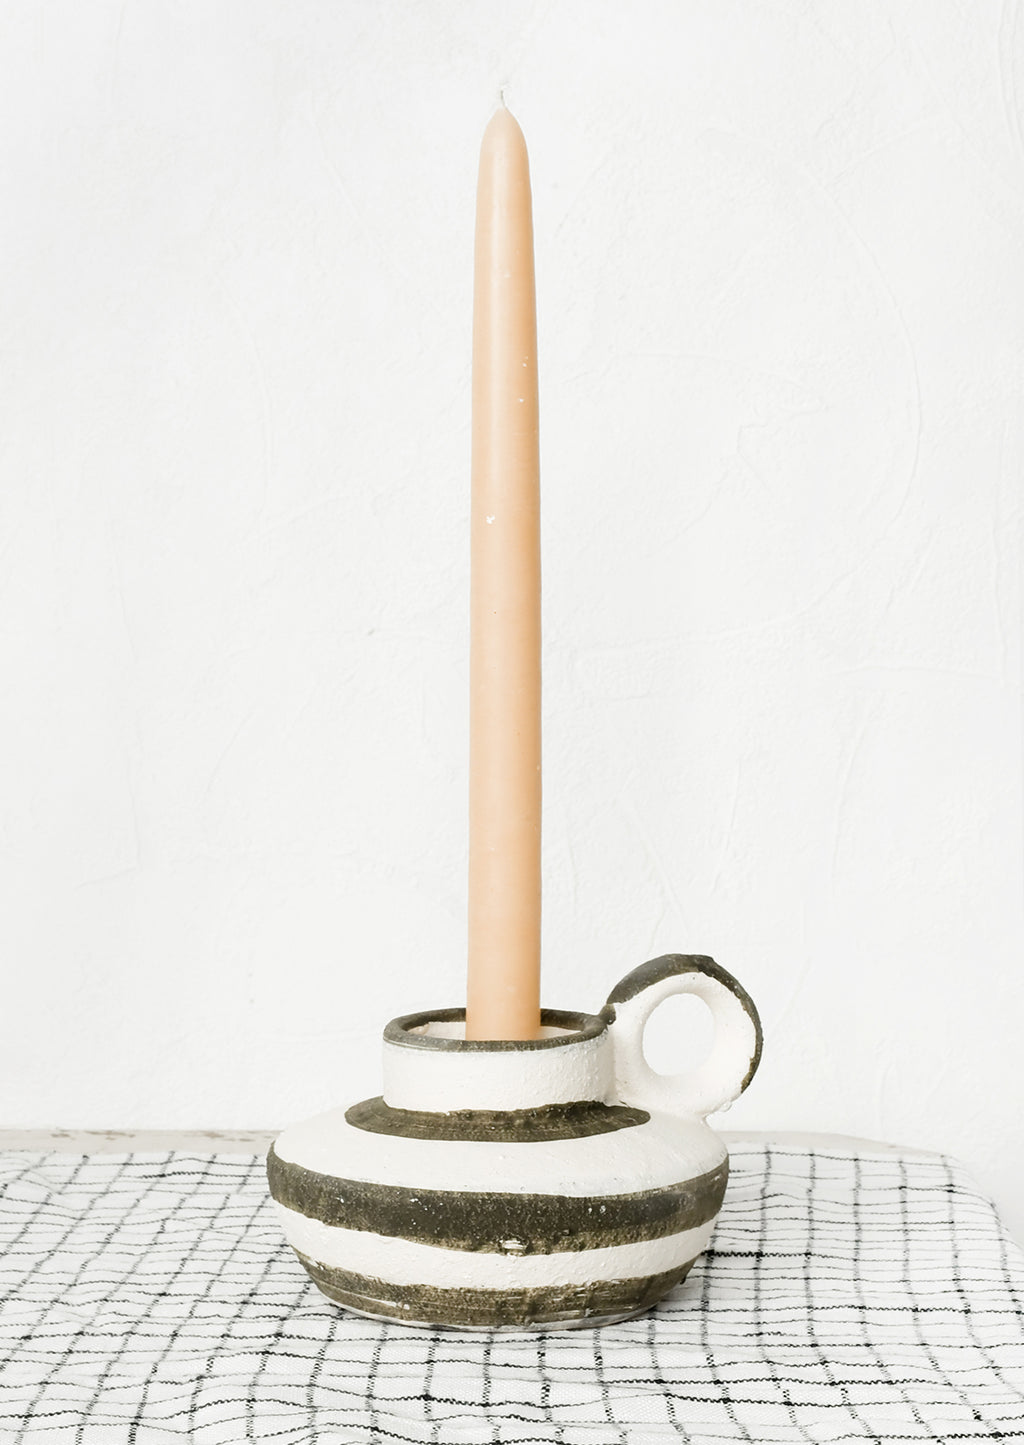 2: A black and white candle holder holding a tan colored taper candle.